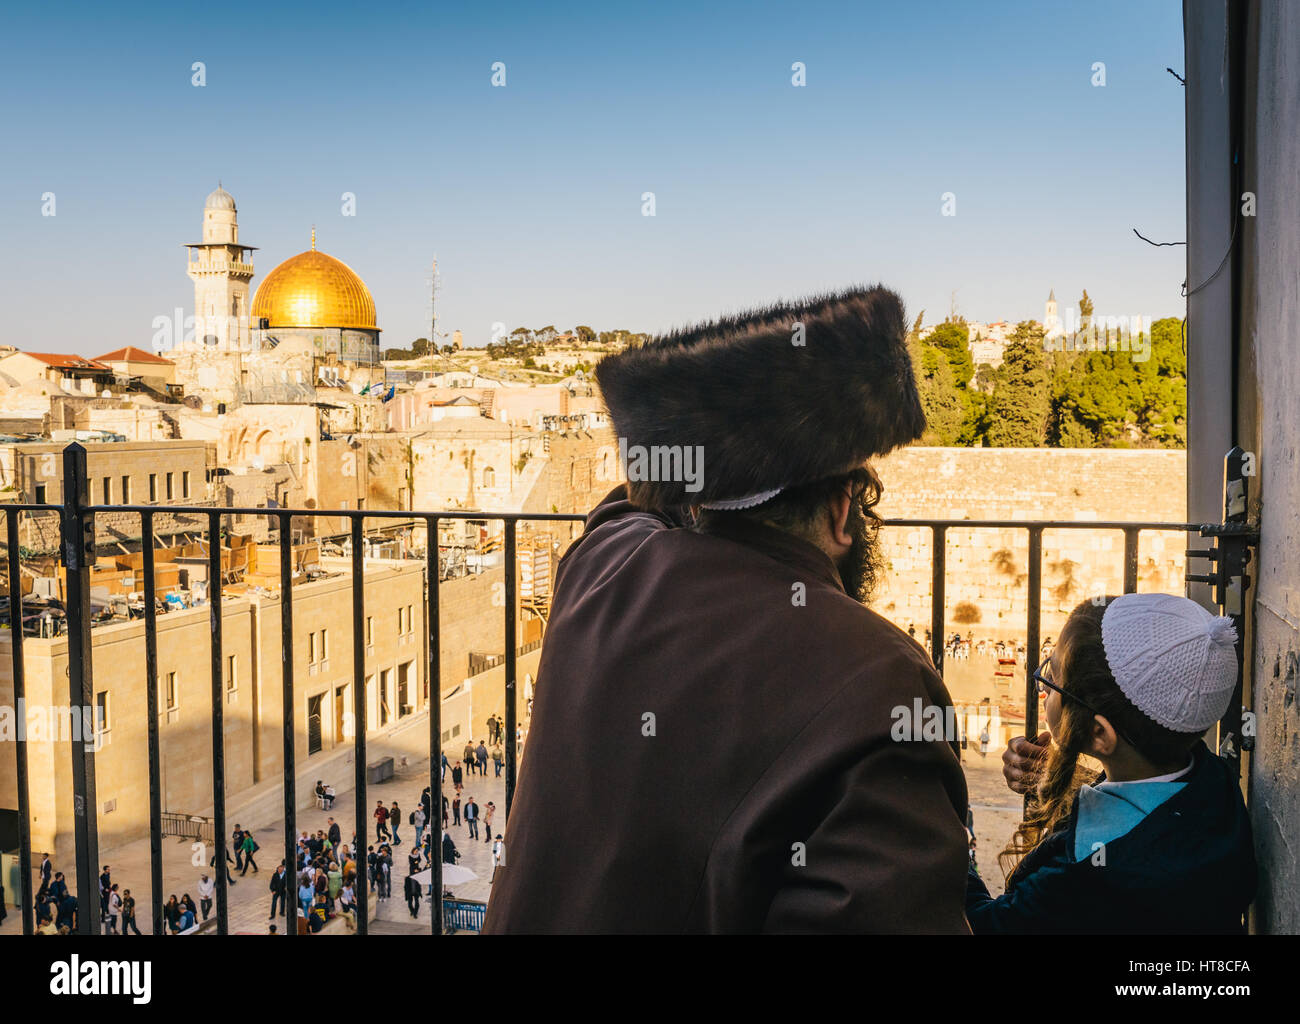 An orthodox Jewish man wearing a shtreimel and a boy overlook the Stock Photo